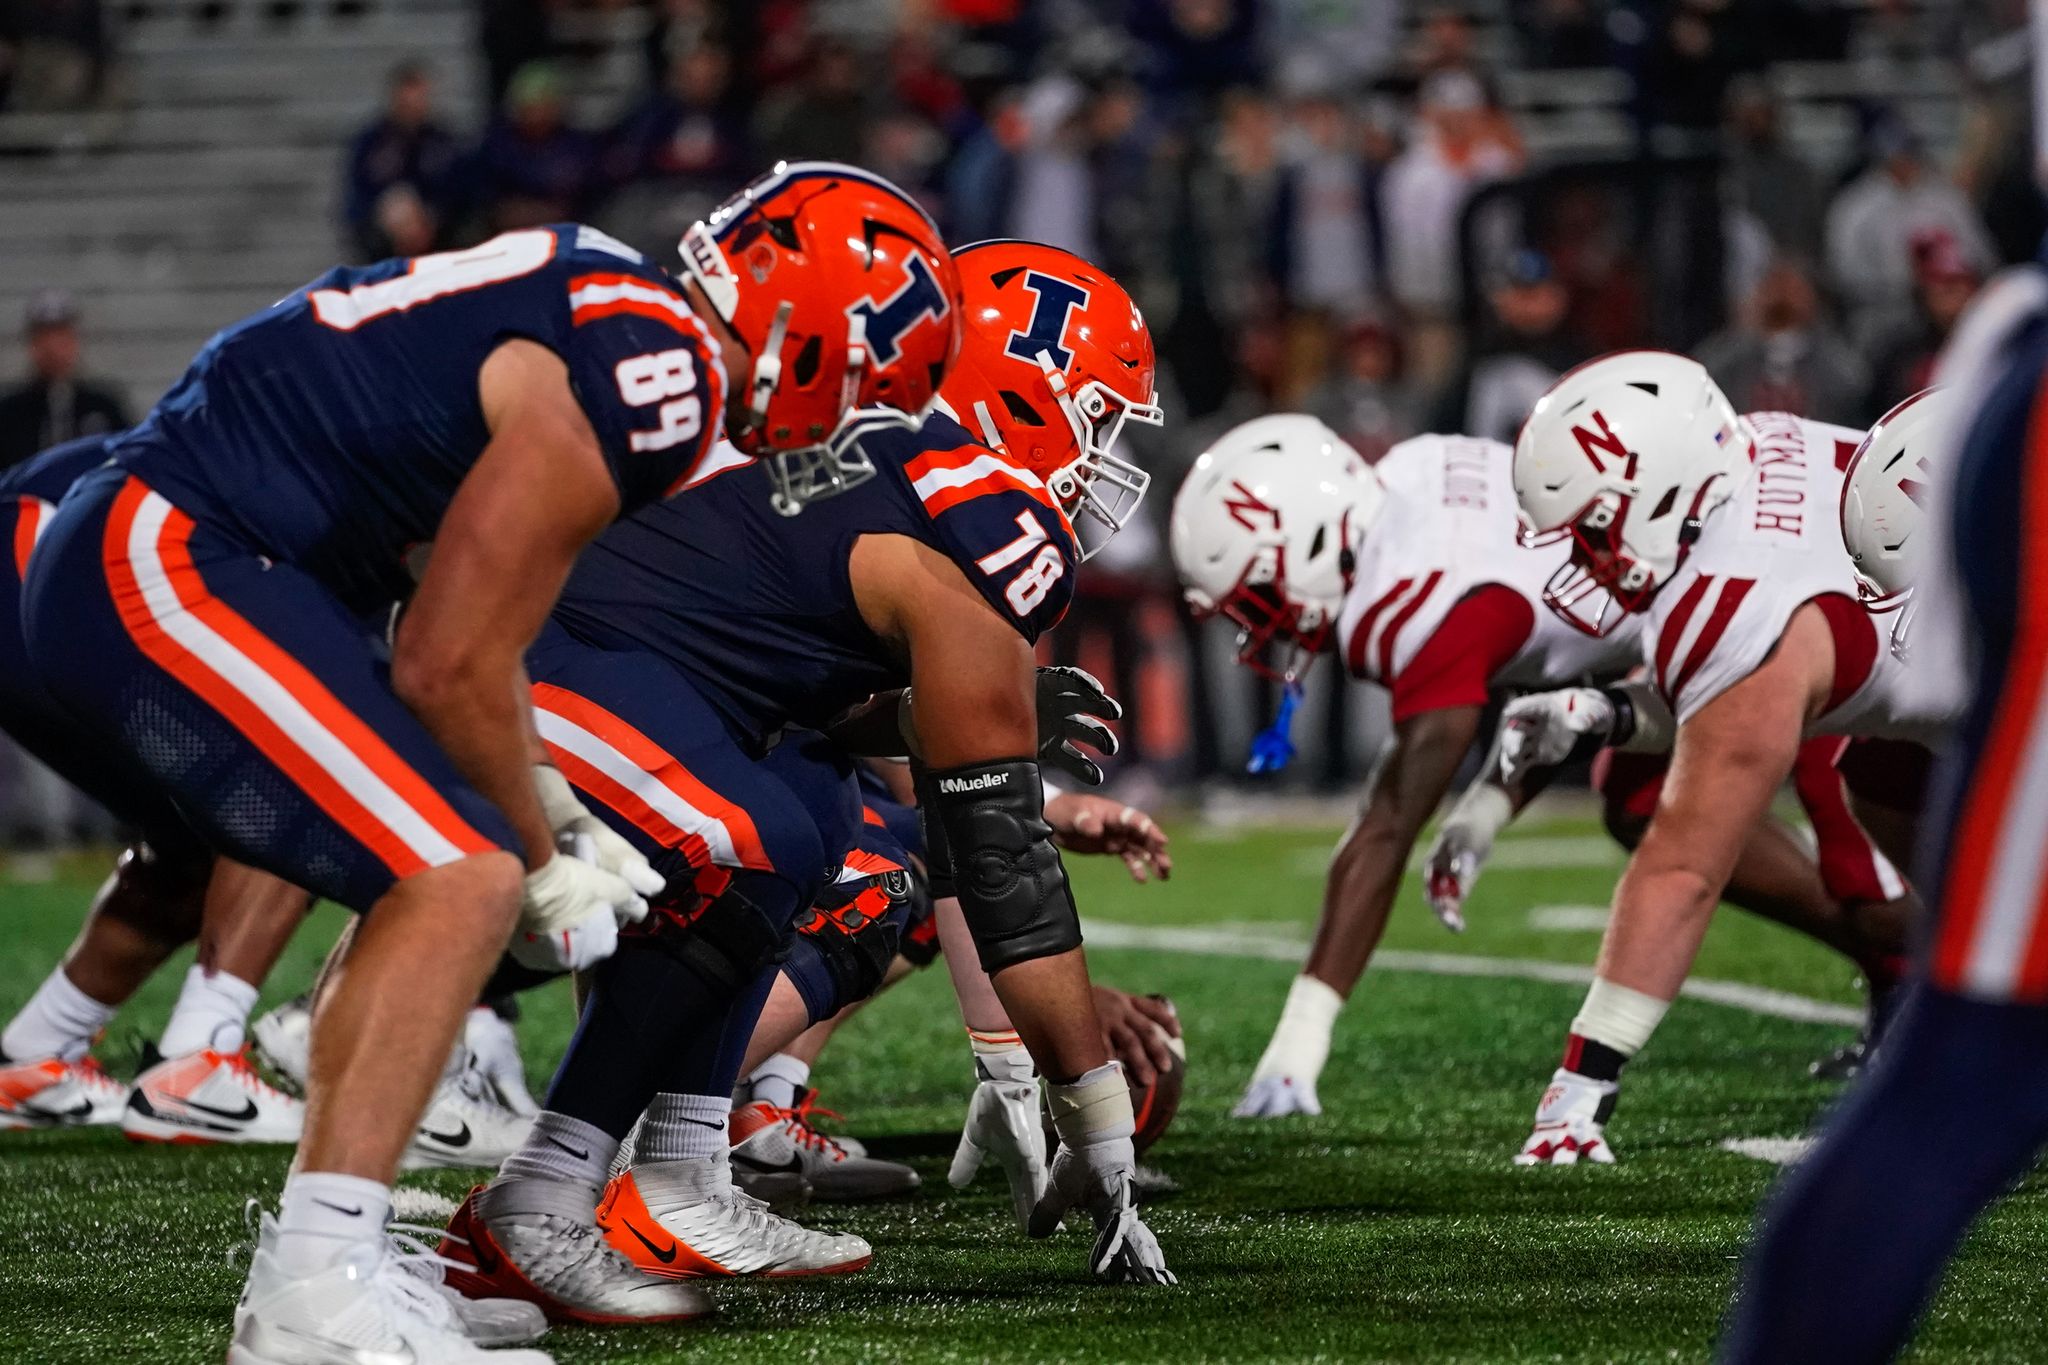 Illini Film Review - Nebraska 20, Illinois 7 - How the Short, Quick Passing Scheme Helps and Hurts Luke Altmyer